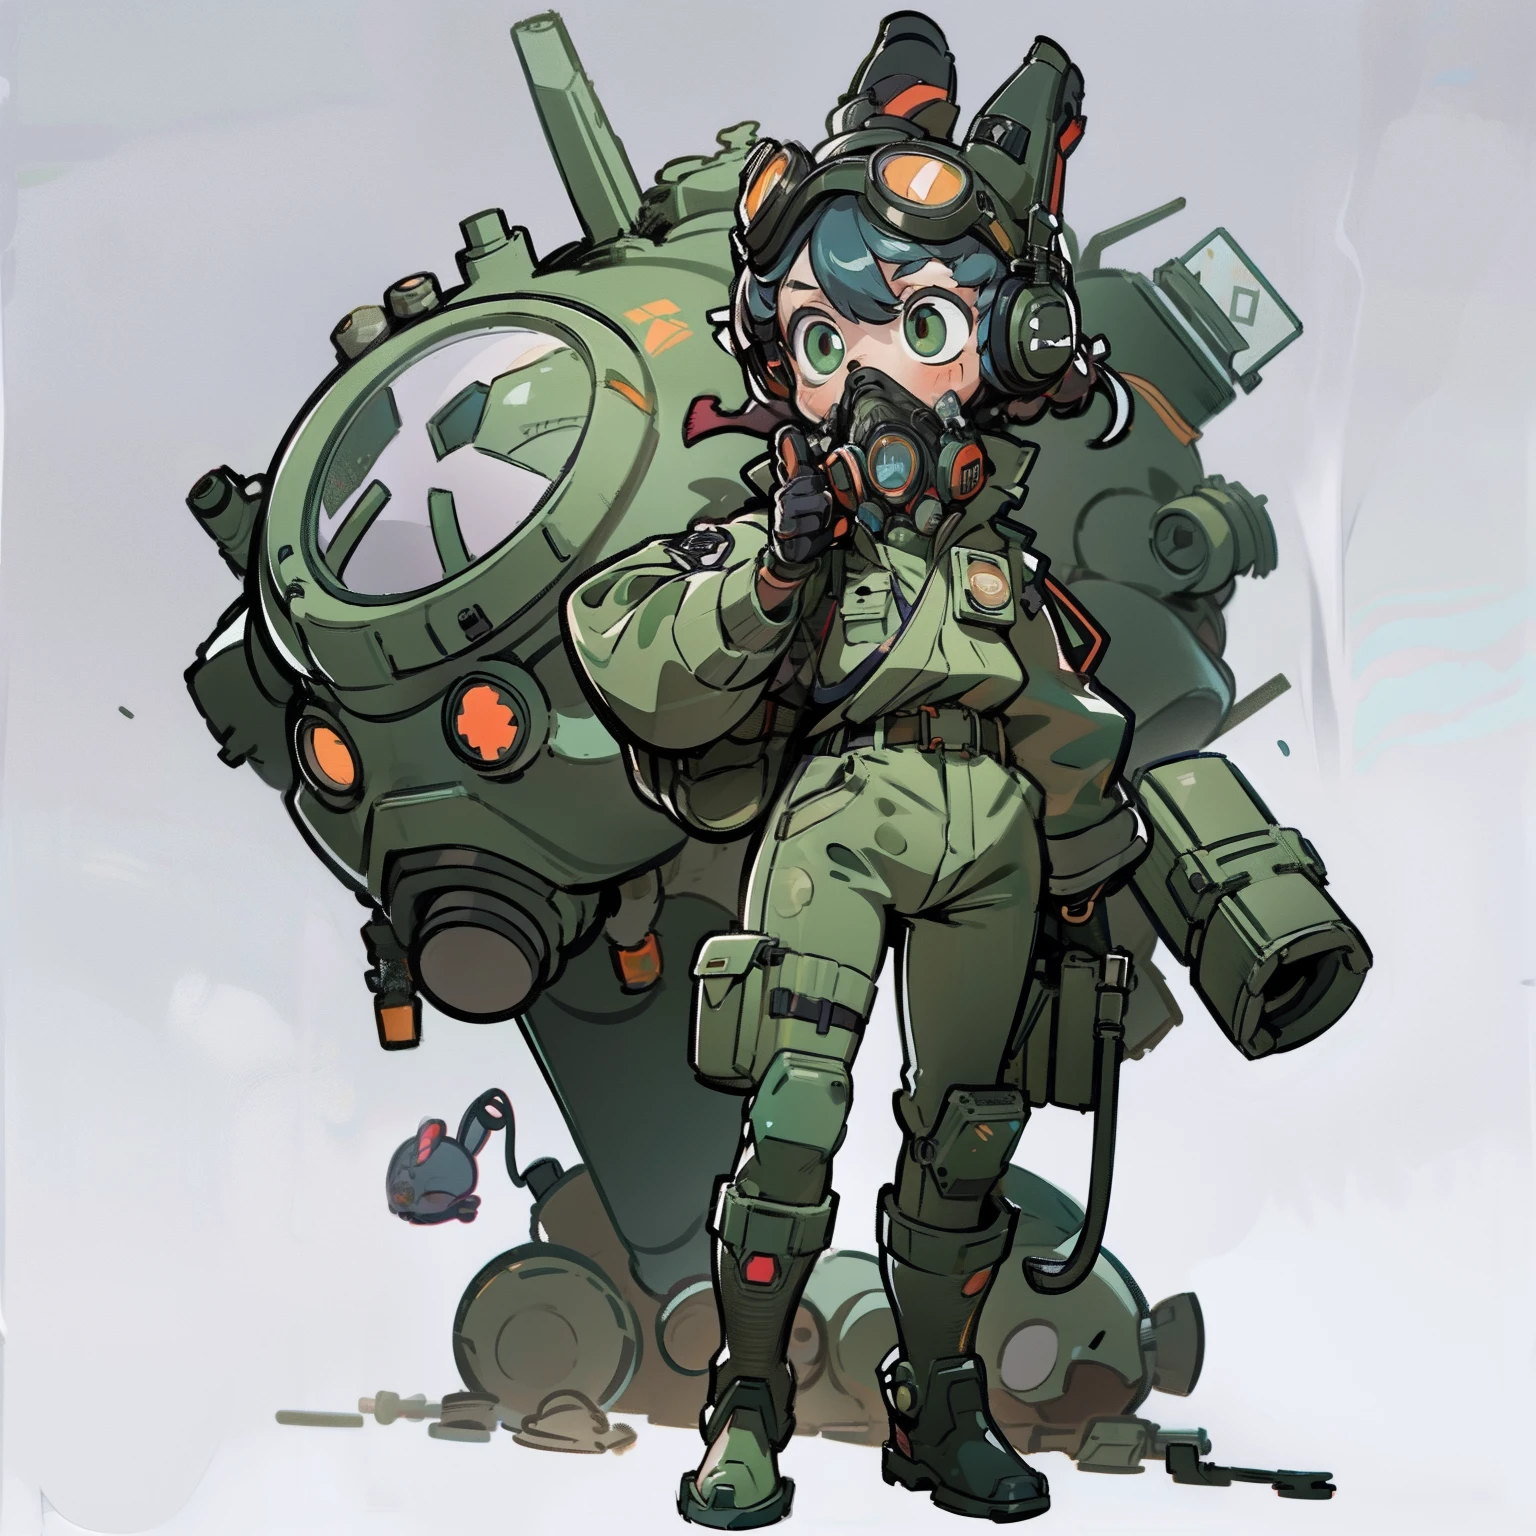 masutepiece, Best Quality, ((Full body shot)), No background, White background, a gas mask, goggles, headphones, mechanical bunny hat, Military, Man's, long boots, camo, chibi, giant robot hand